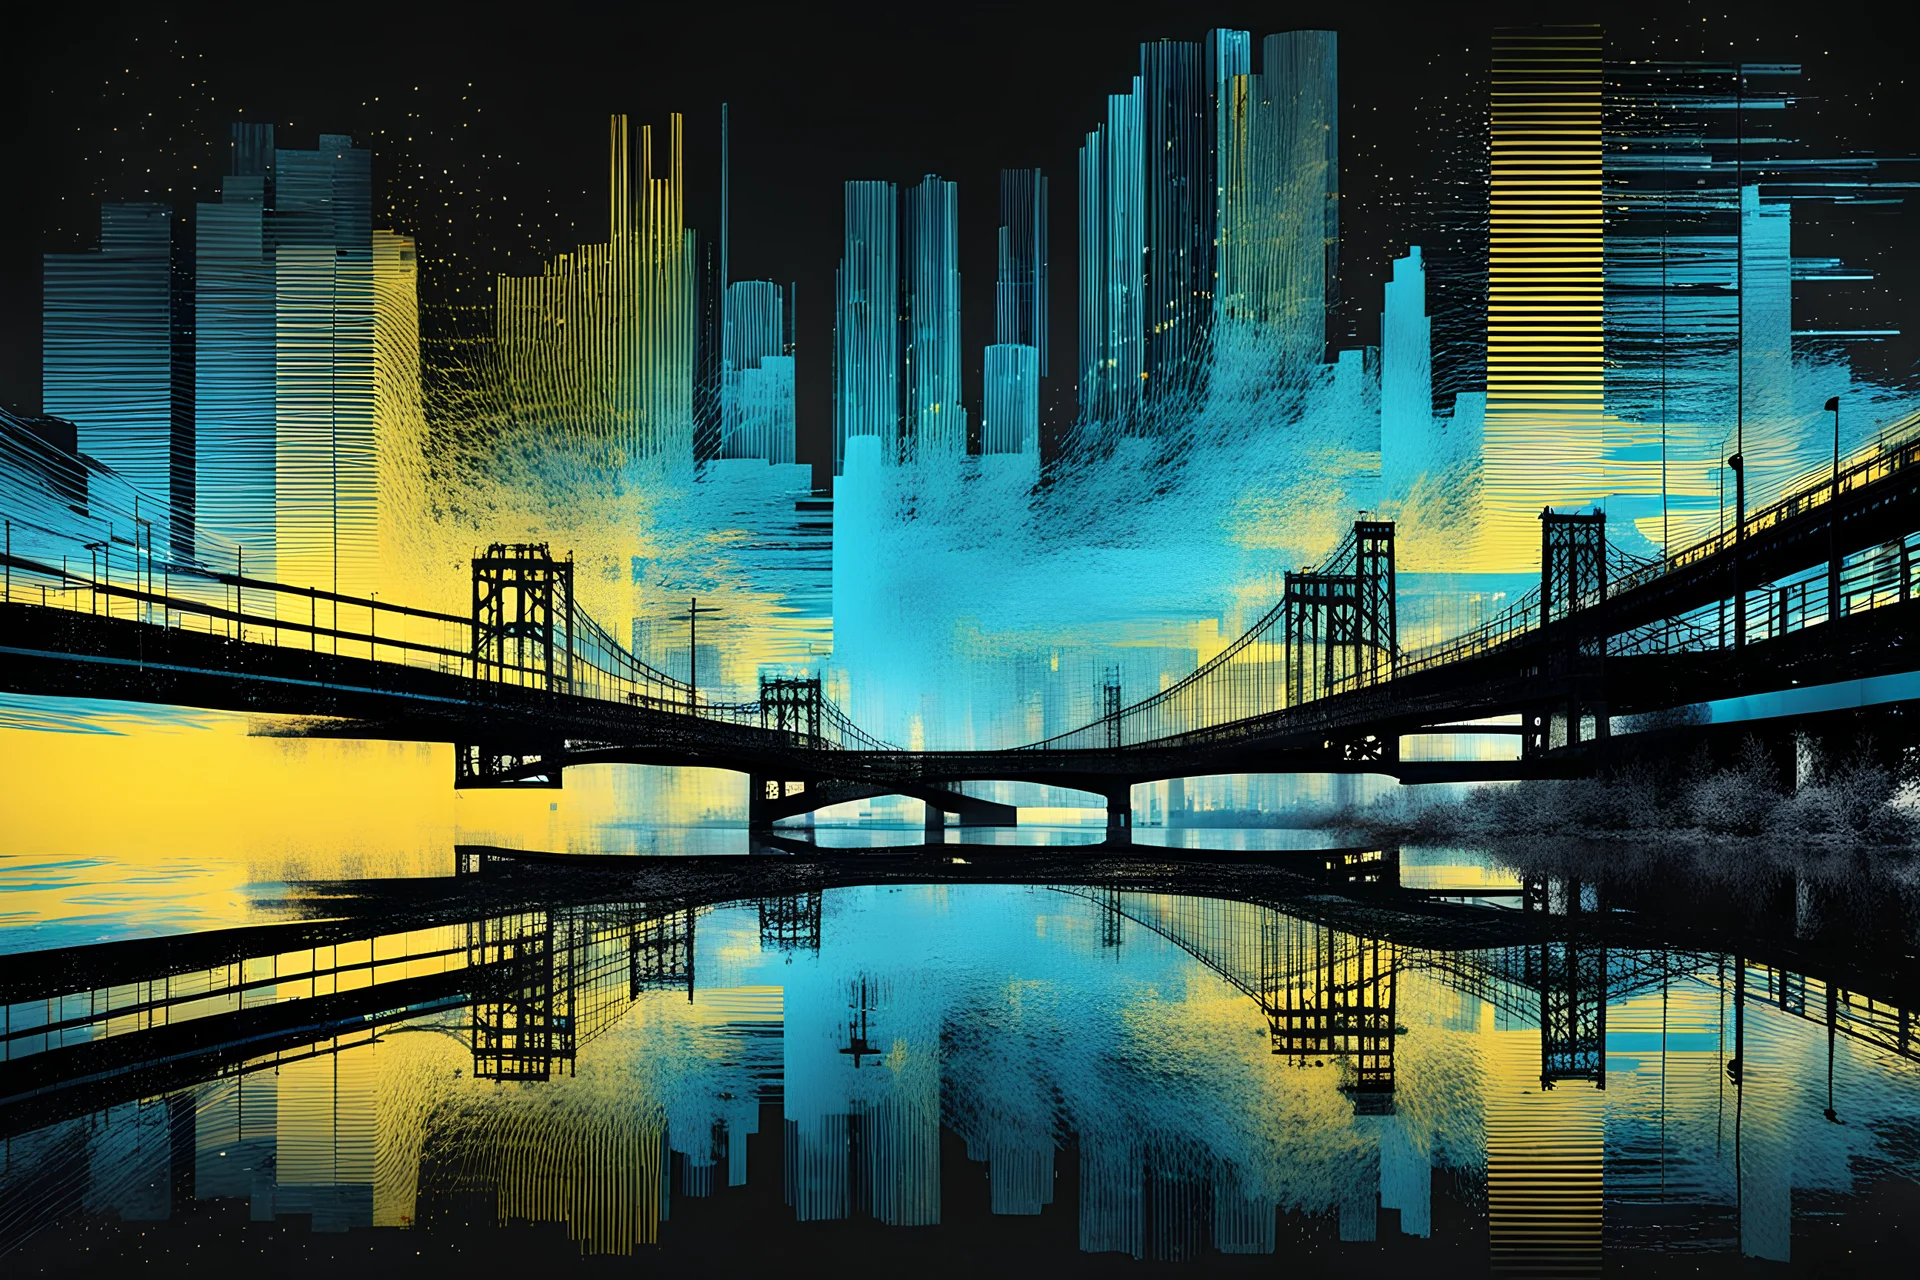 Double exposure transparent glich picture silhouette of a building, bridges, abstract patterns, glitch art with distorted shapes, optical illusion, gray-yellow and blue gradient effect, rhythmic noise particles. Grain scored texture. Black background.